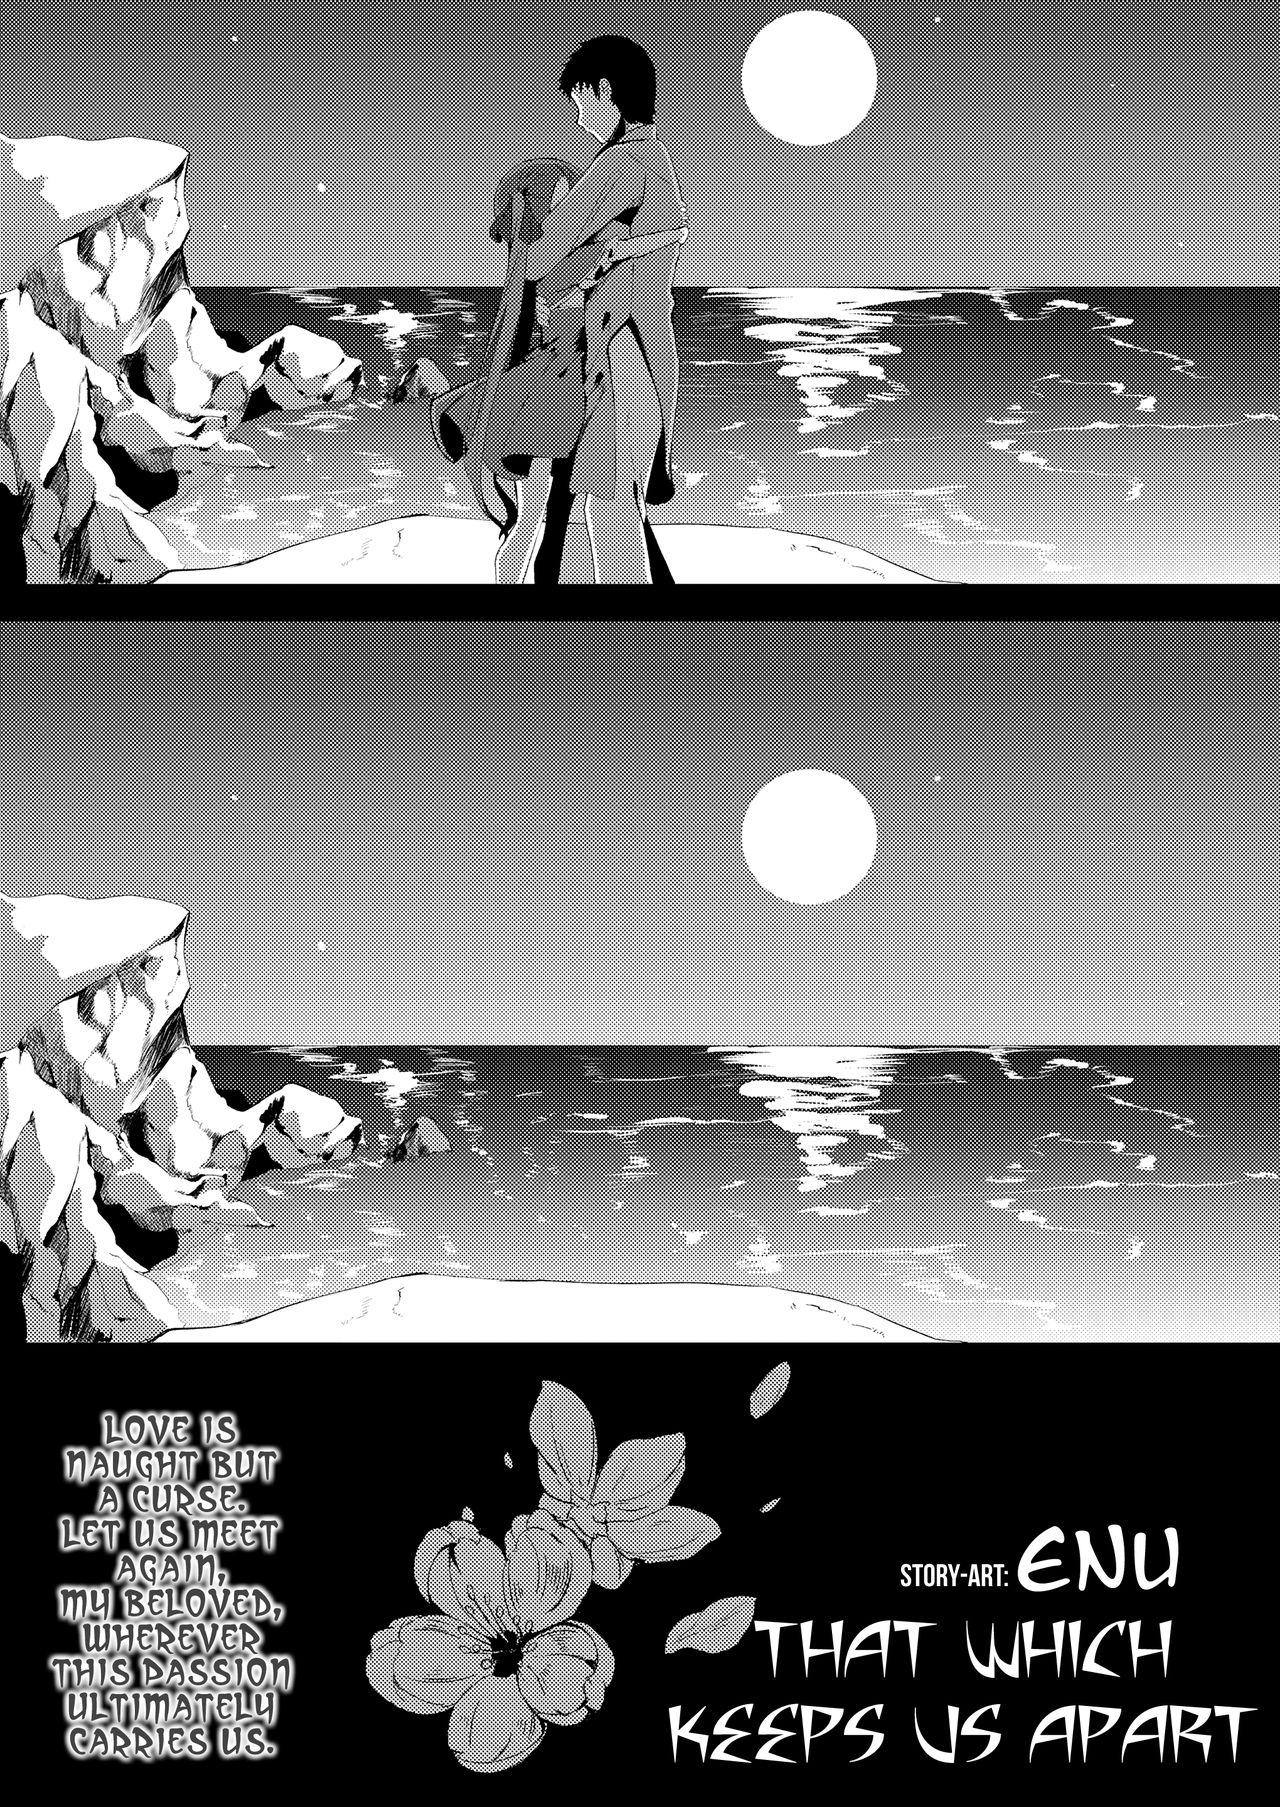 Teenager Futari wo Hedateru Mono | That which keeps us apart Solo Girl - Page 3